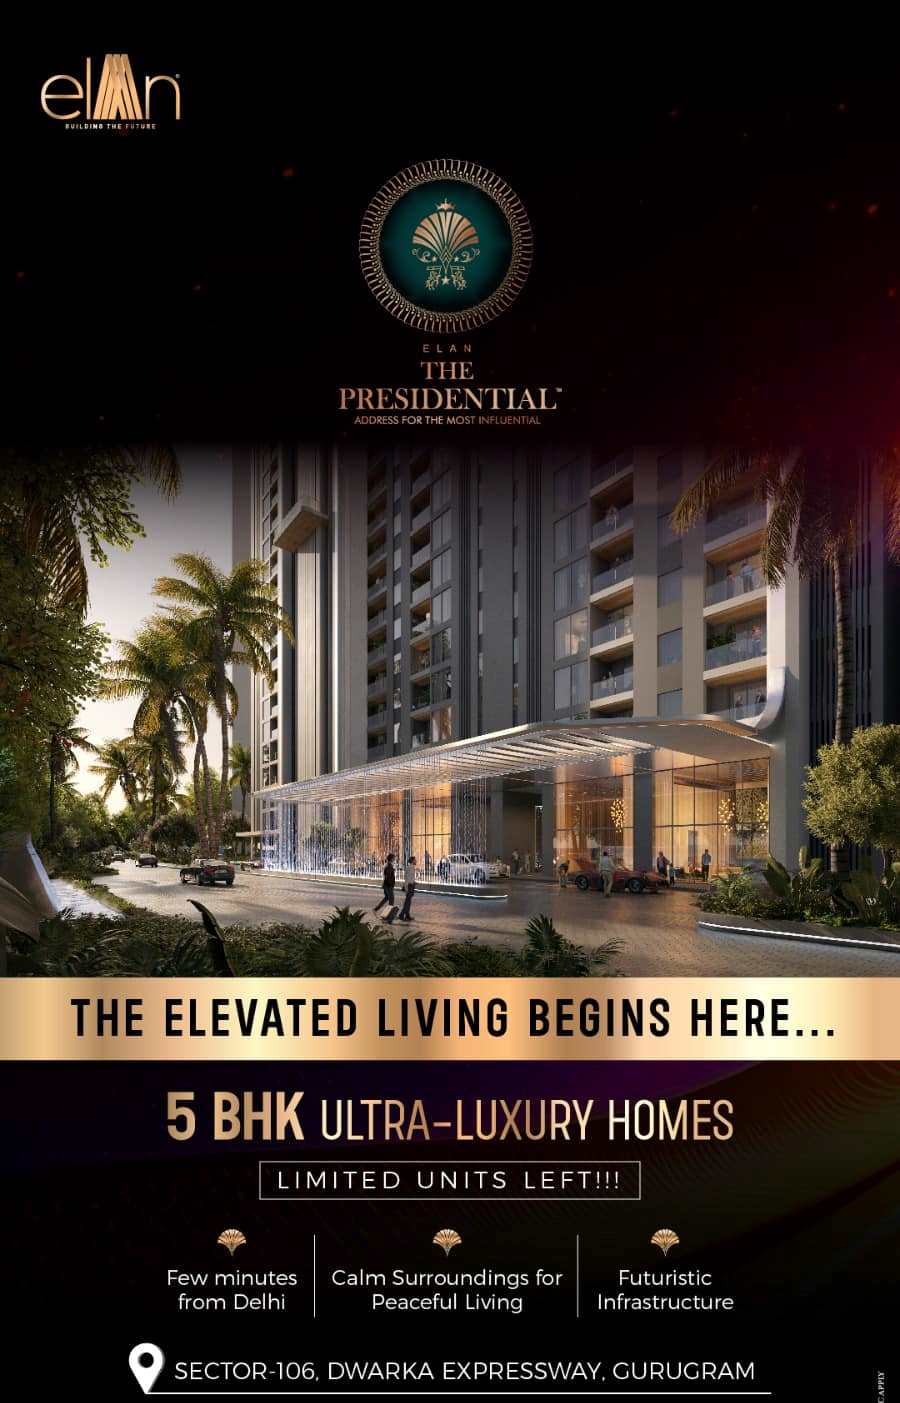 Book 5 BHK ultra luxury homes and limited units left at Elan The Presidential in Dwarka Expressway, Gurgaon Update